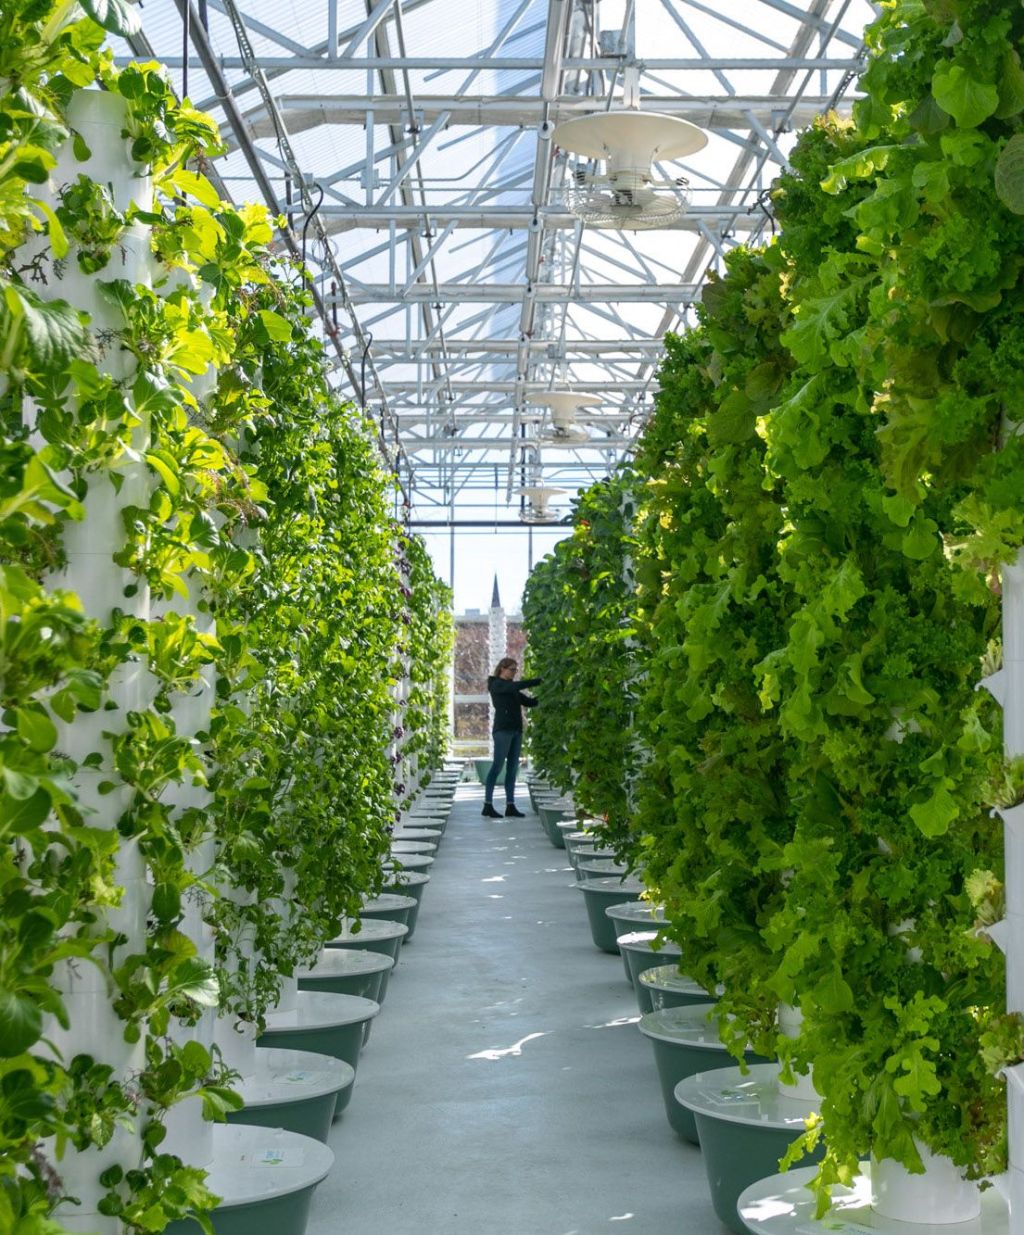 "Growing Up: Vertical Farming Takes Greenhouses to New Heights"